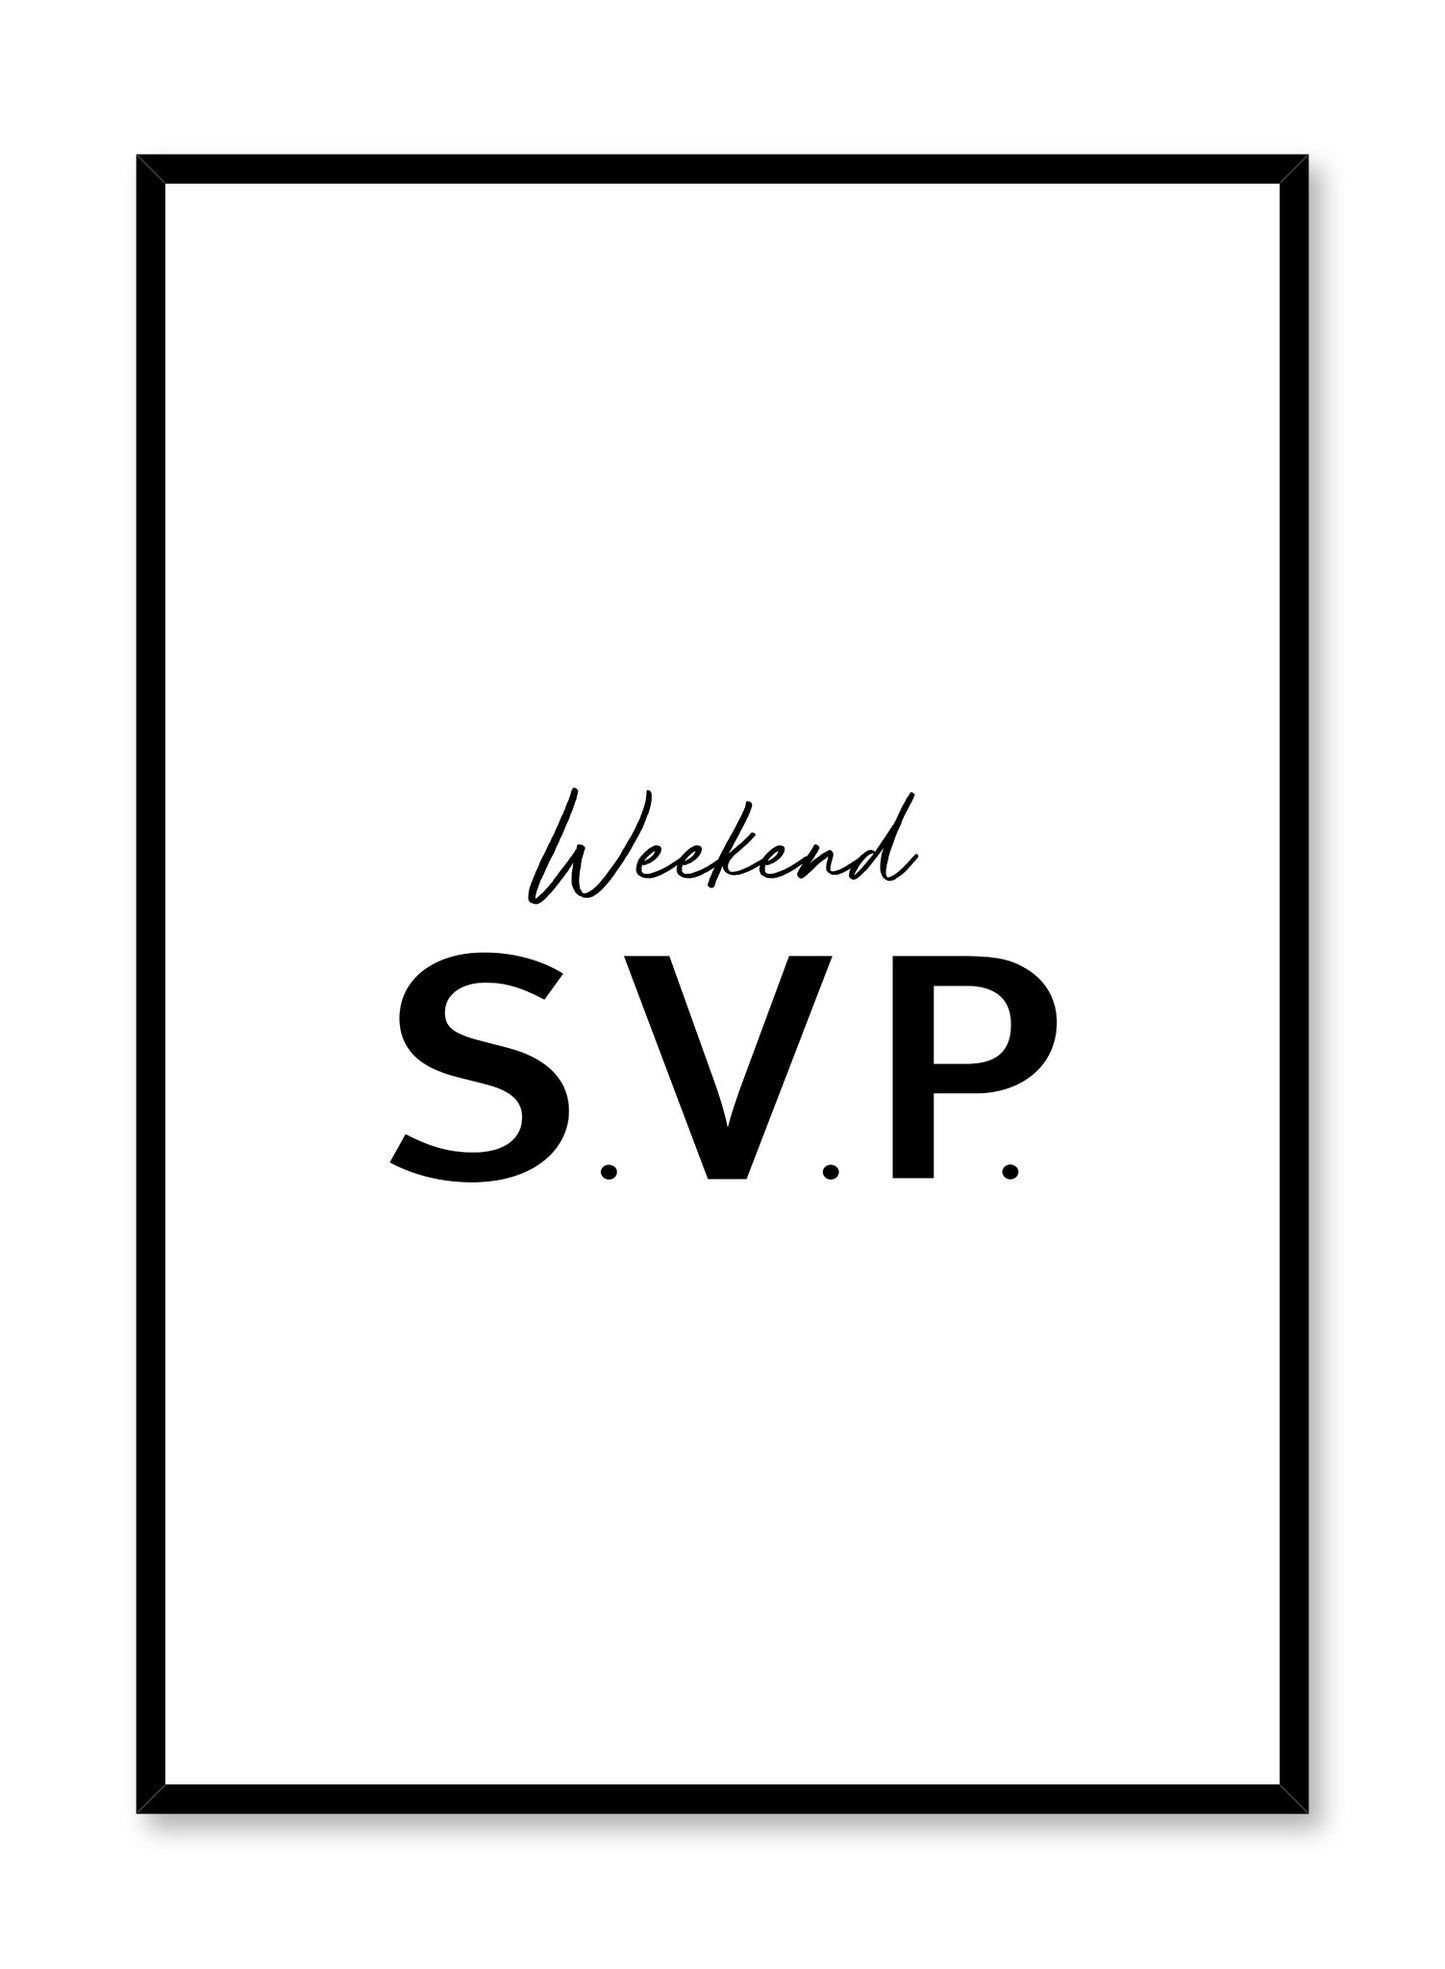 Scandinavian poster with black and white graphic typography design of Weekend s.v.p. by Opposite Wall